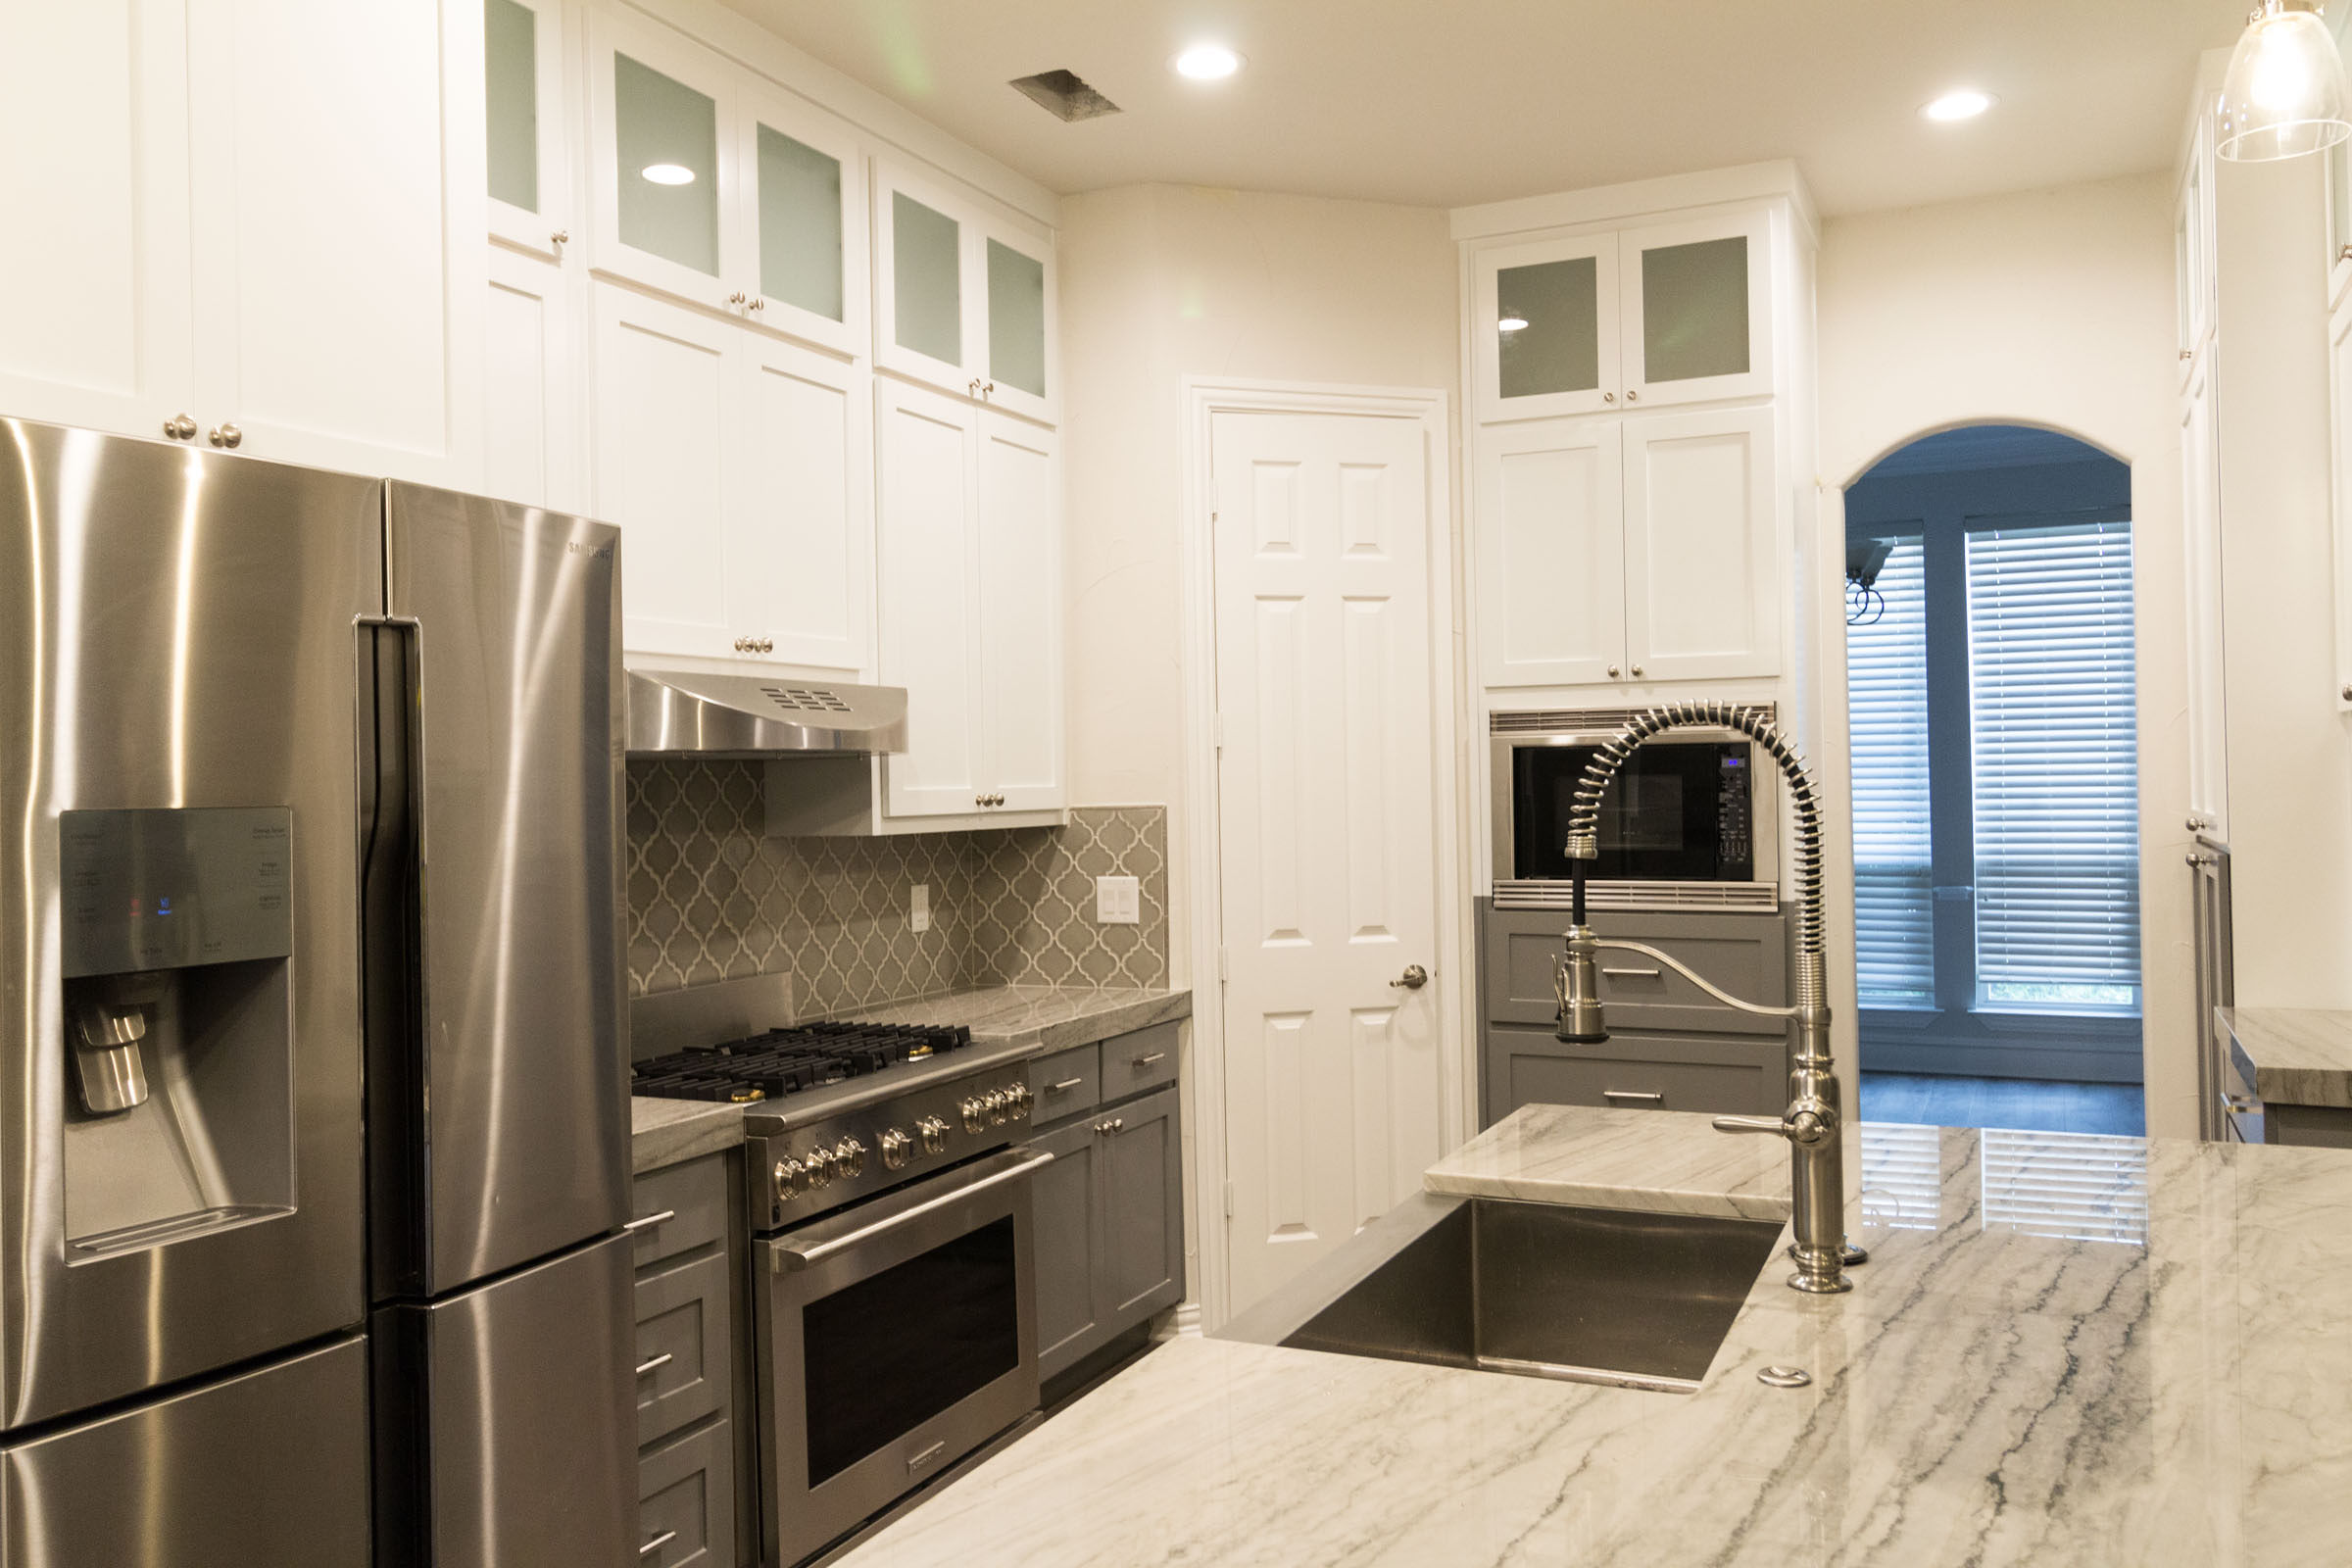 Contemporary kitchen remodel, grey and white, shaker cabinets, stainless steel, farmhouse sink, open floor plan